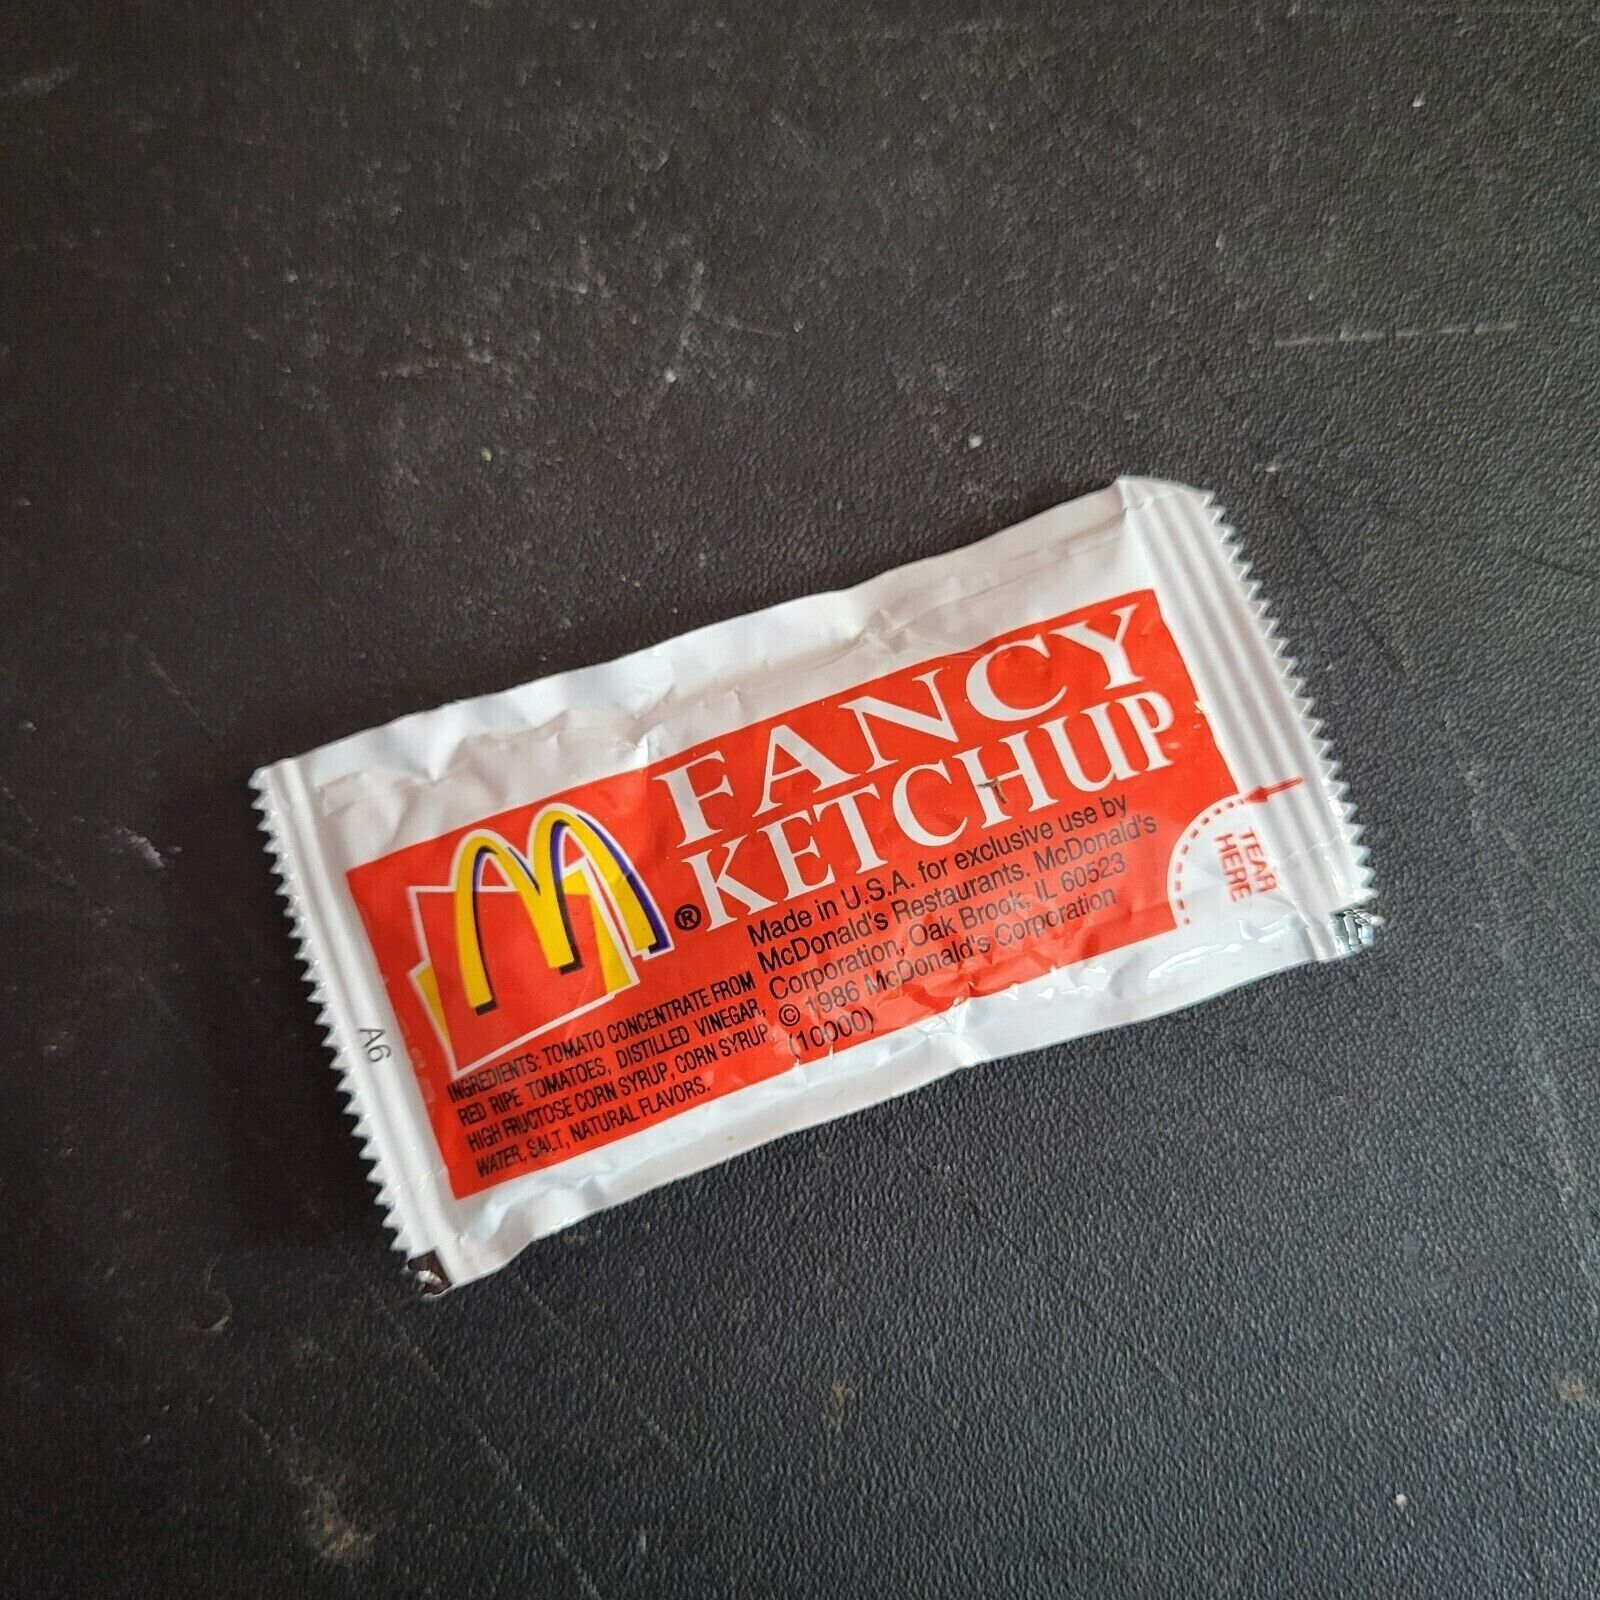 1986 McDonalds Un-Opened Fancy Ketchup Condiment Packet (Excellent condition)